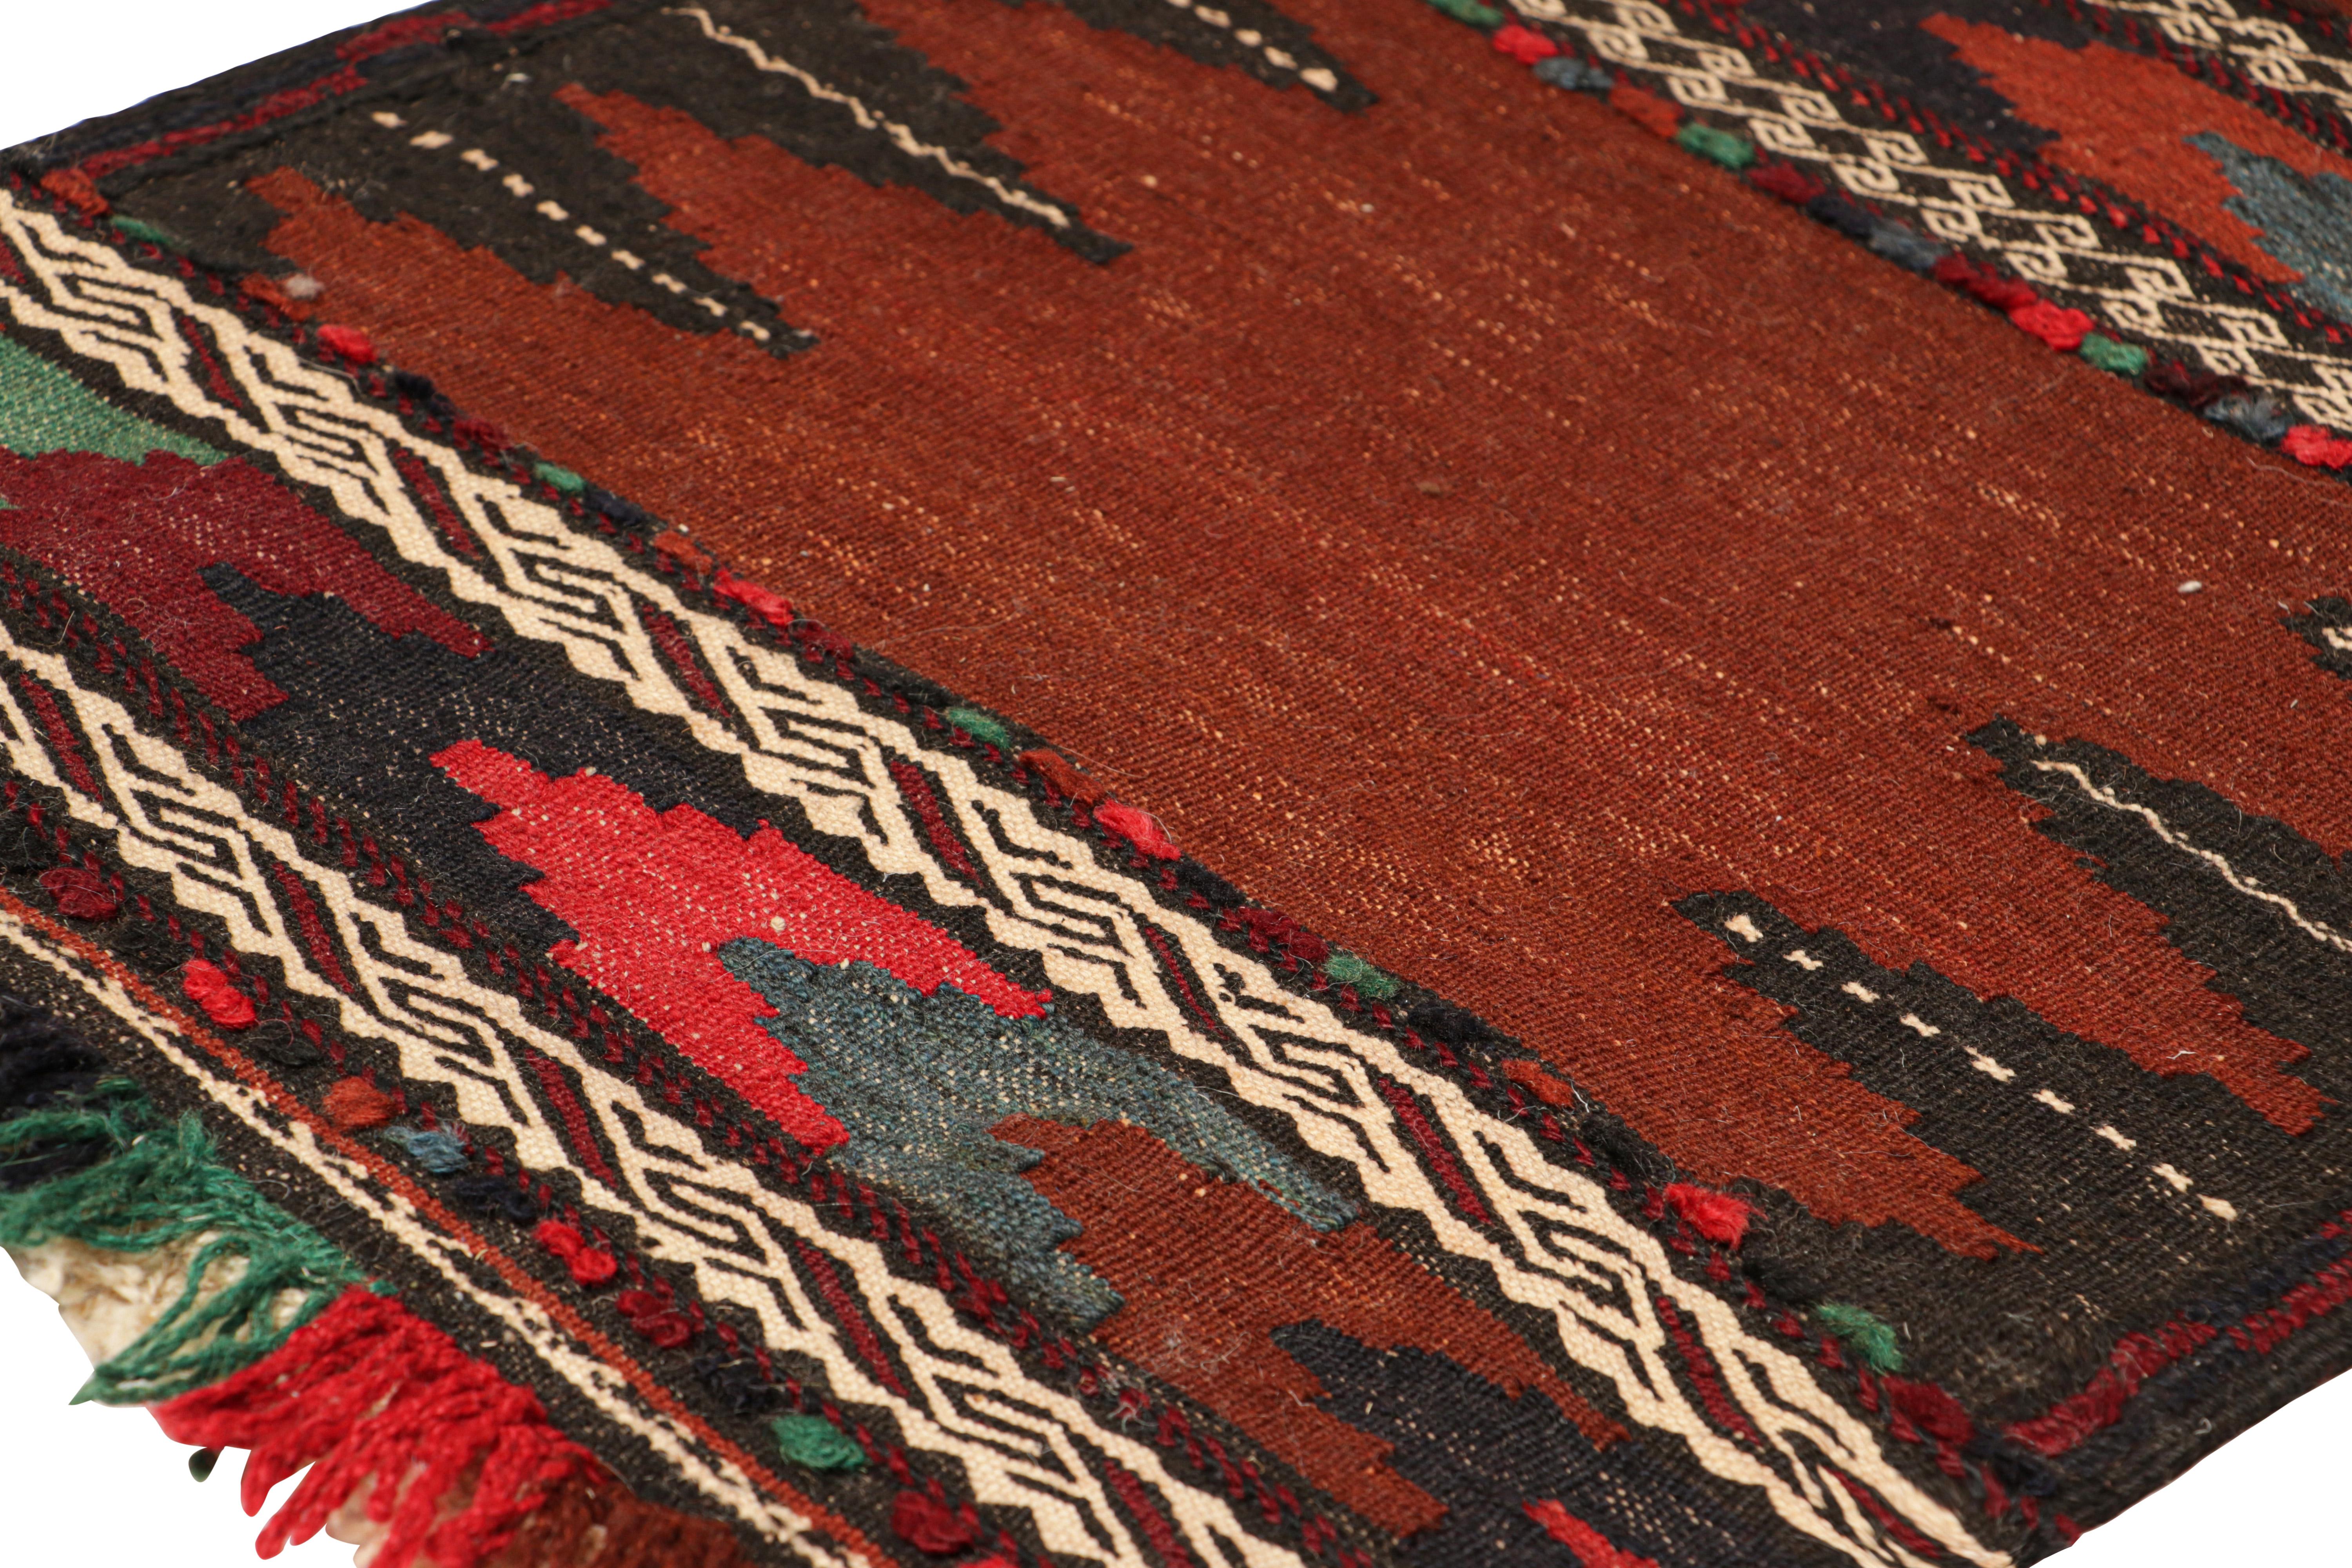 Hand-Woven Vintage Afghan Kilim in Rust with Geometric Stripes, from Rug & Kilim For Sale